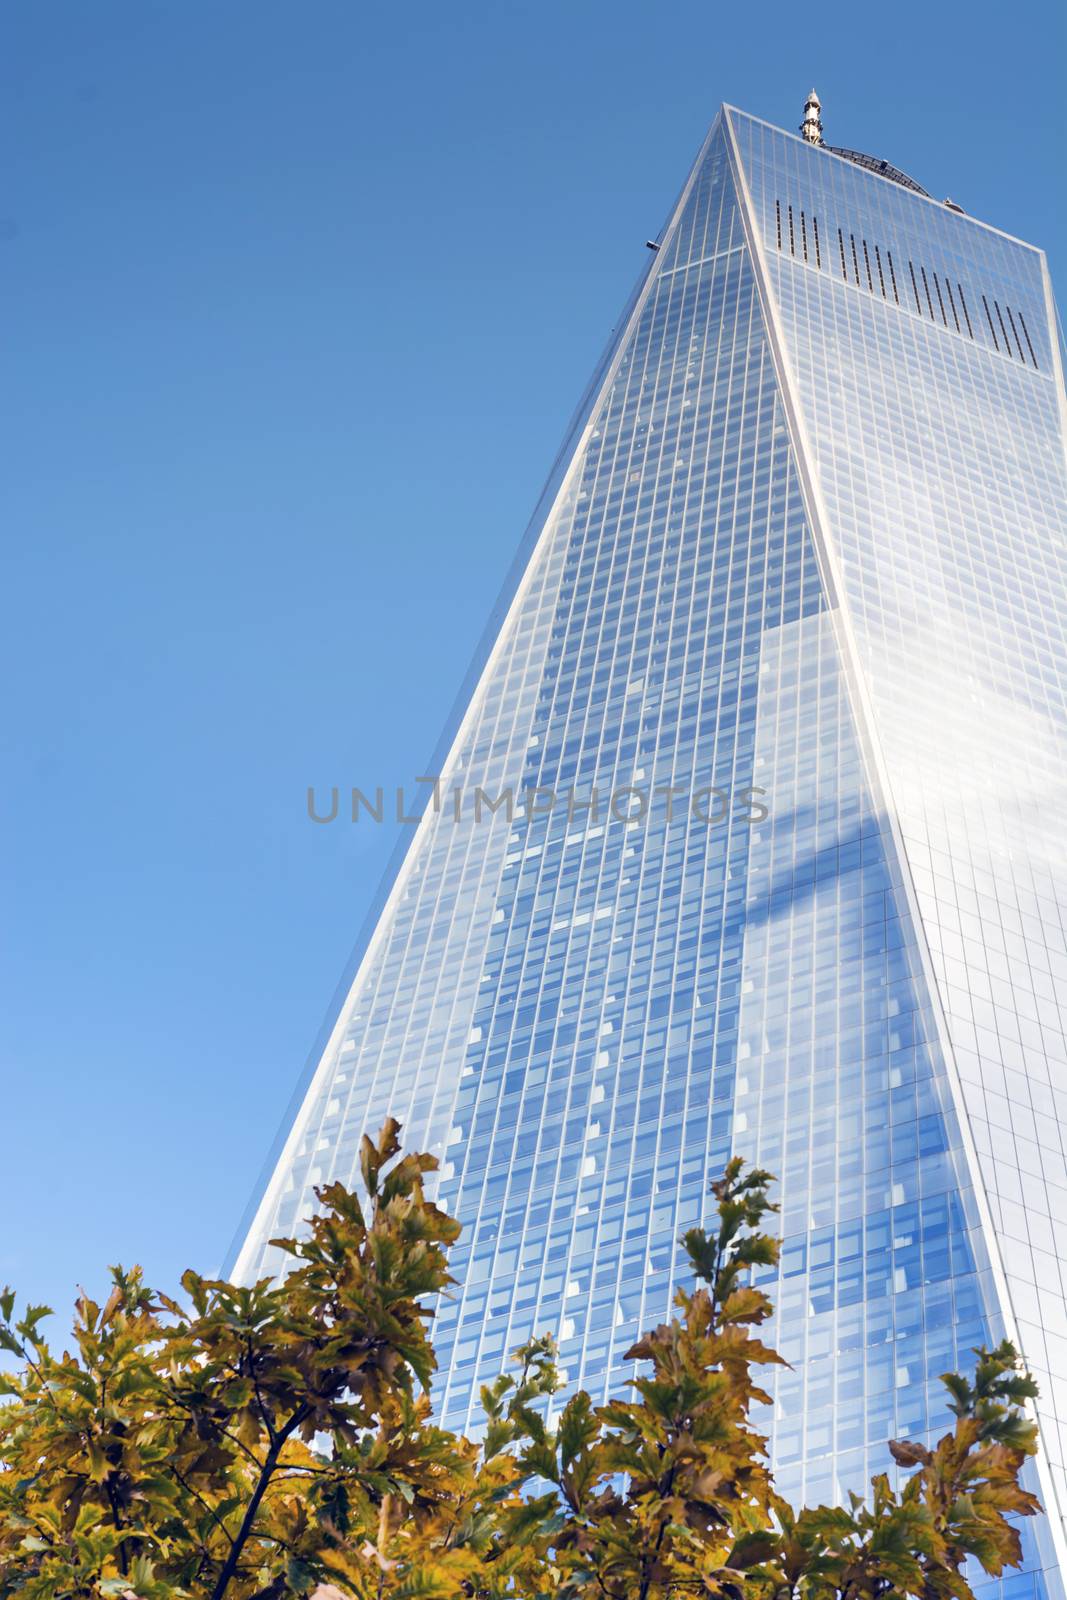 Freeedom Tower at The One World Trade Center in New York by rarrarorro